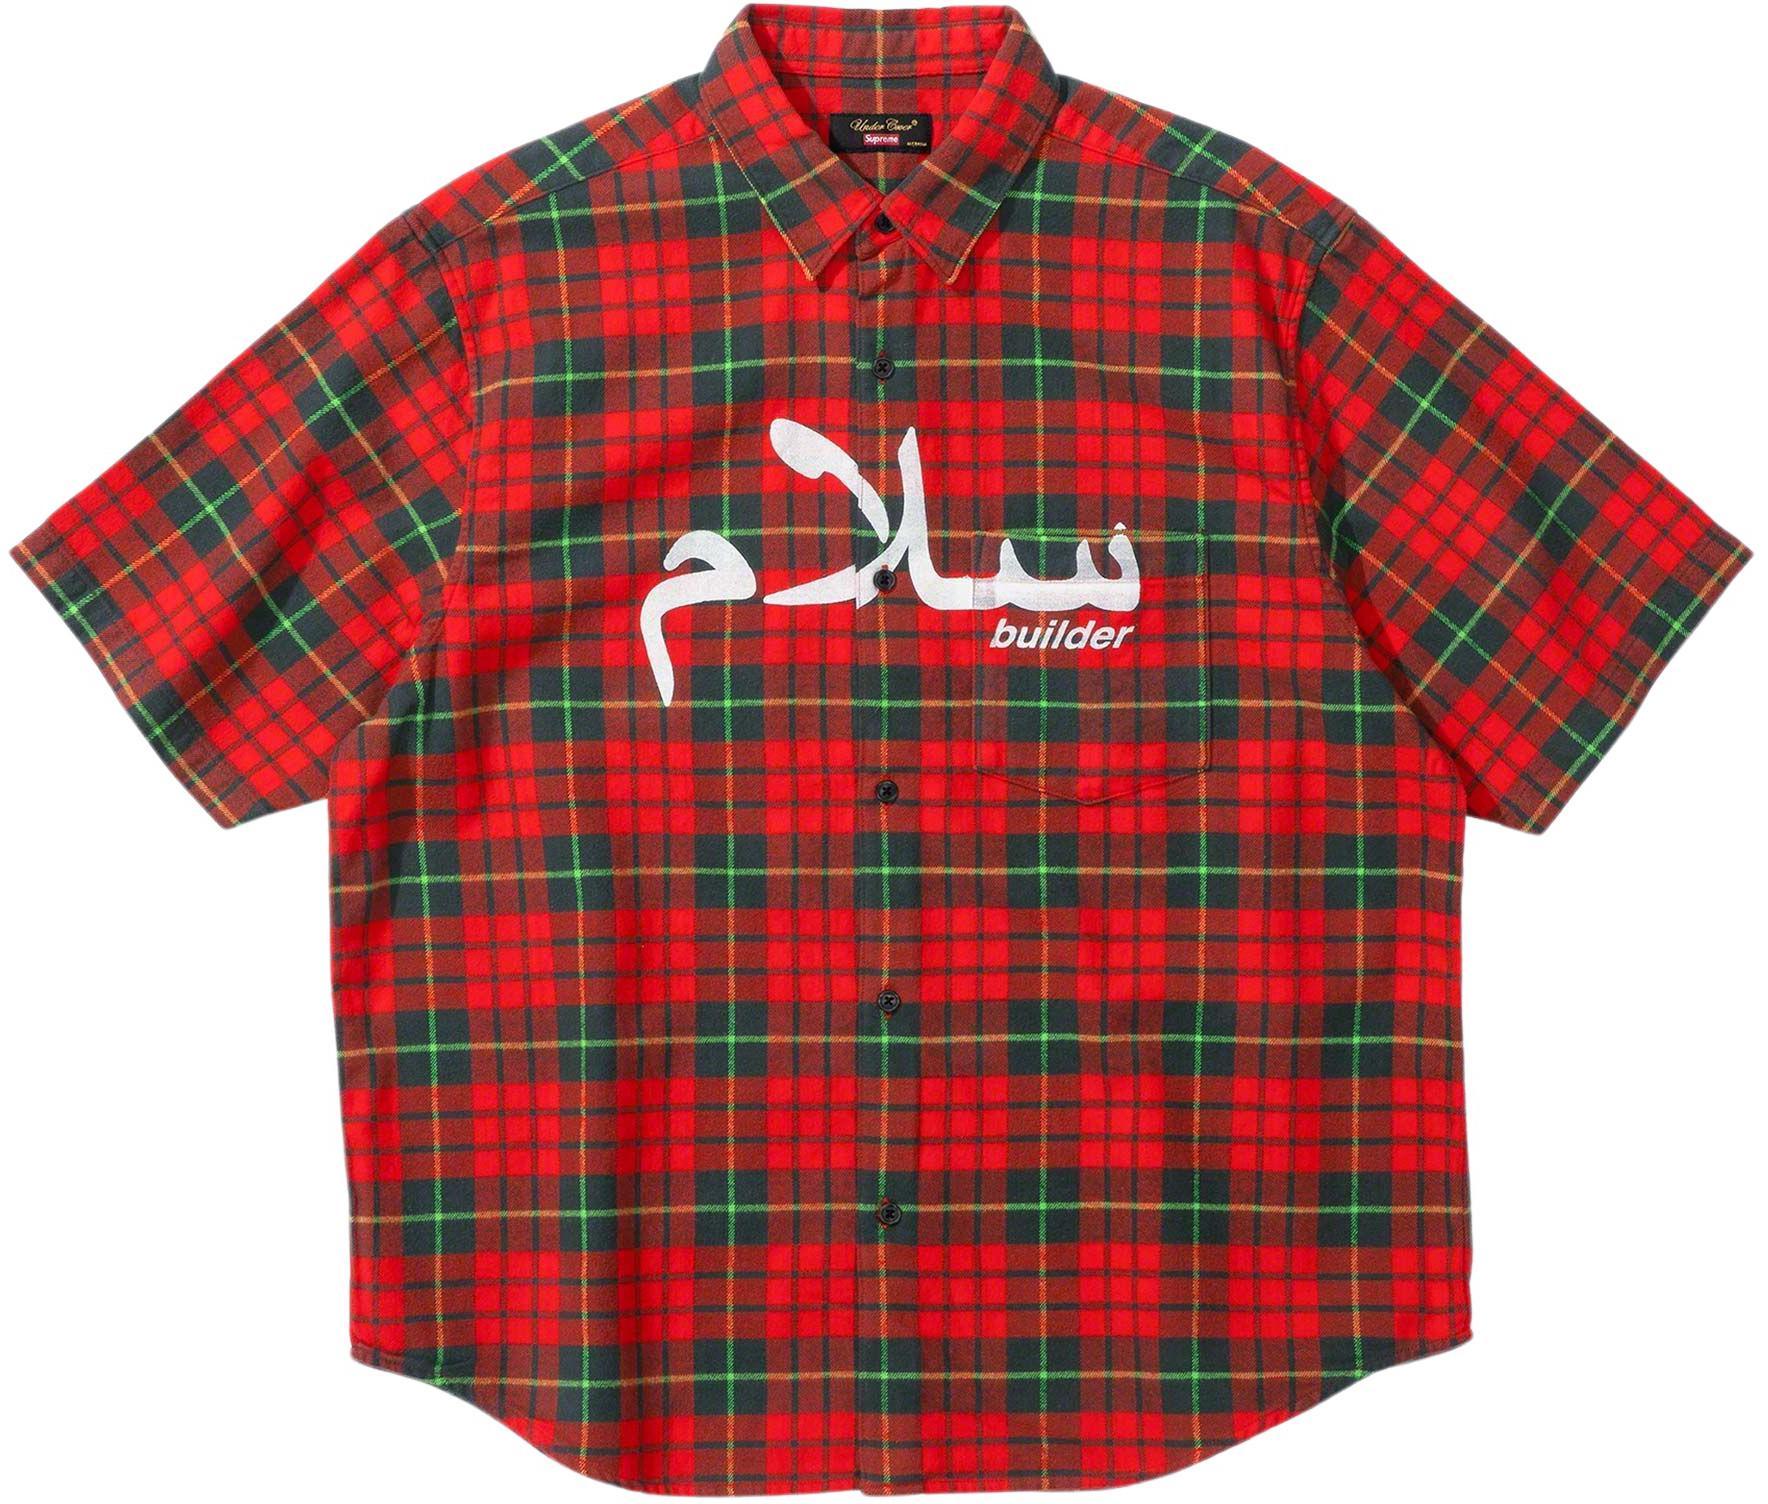 S☆Supreme®/UNDERCOVER S/S Flannel Shirt